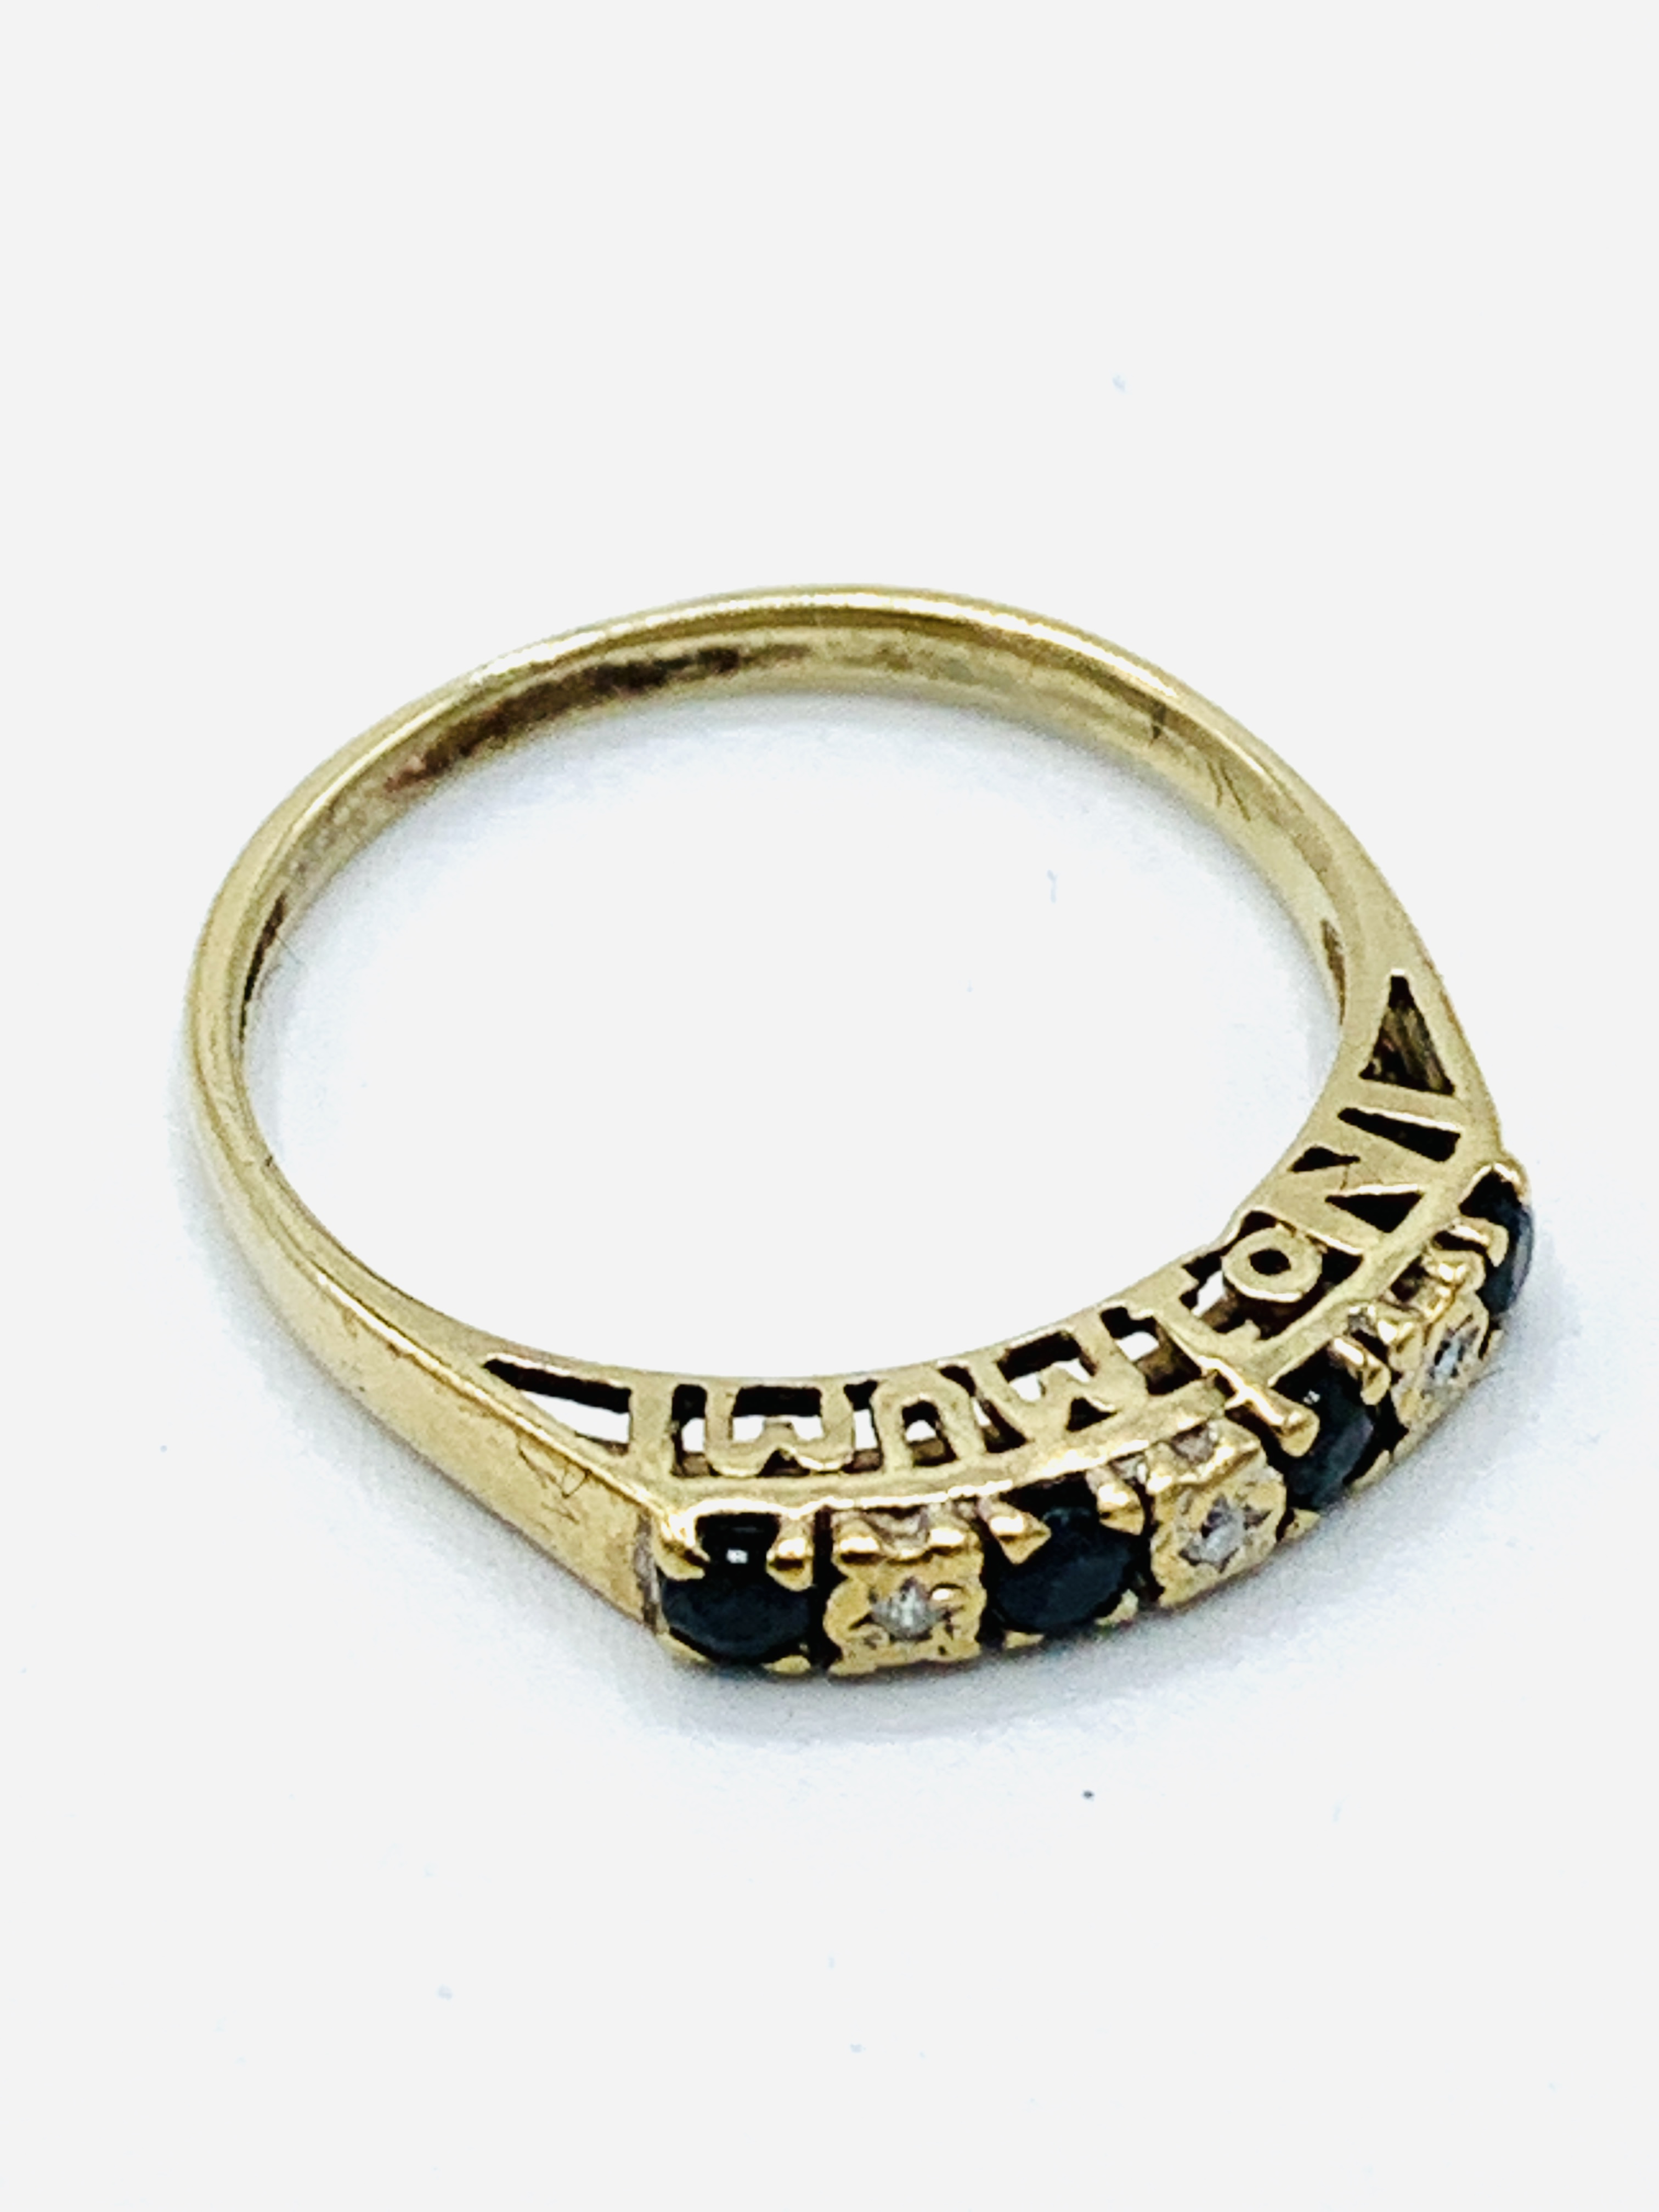 9ct gold sapphire and diamond ring - Image 4 of 4